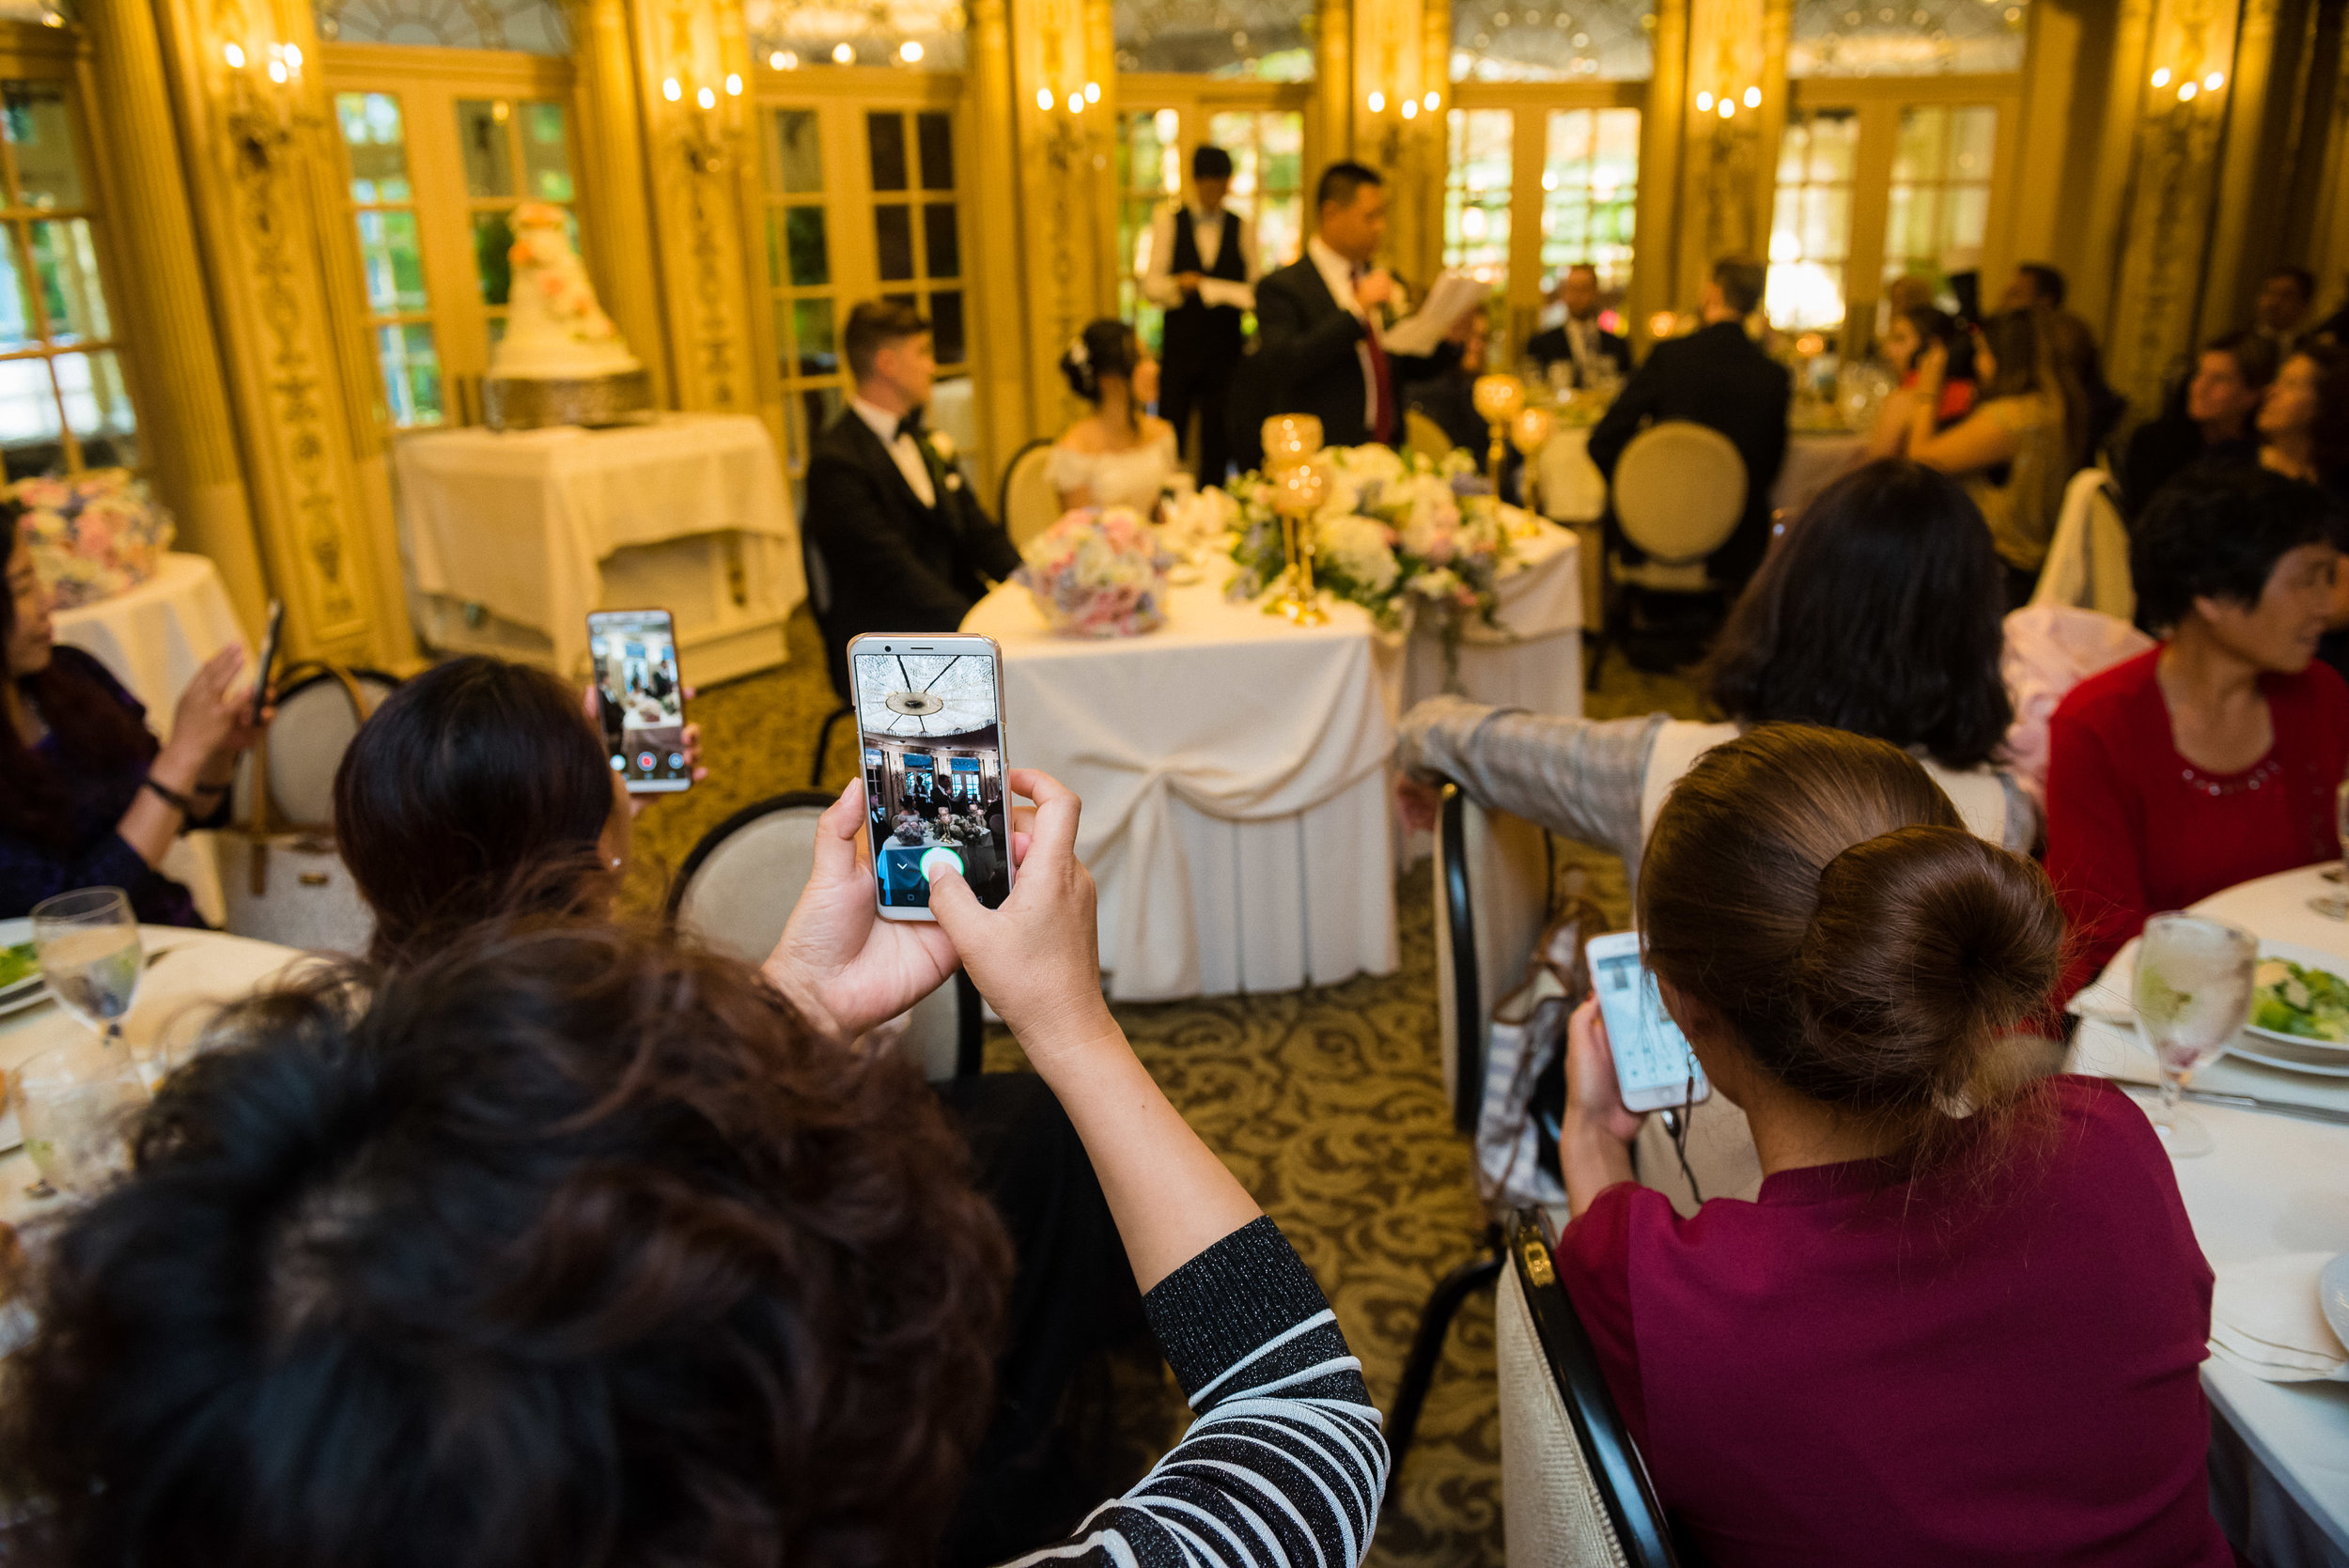  view from ping and brents wedding at the manor in west orange, new jersey. I specialize in wedidng documentary and photojournalism style photography, and it is very nice to take candid moments like these 